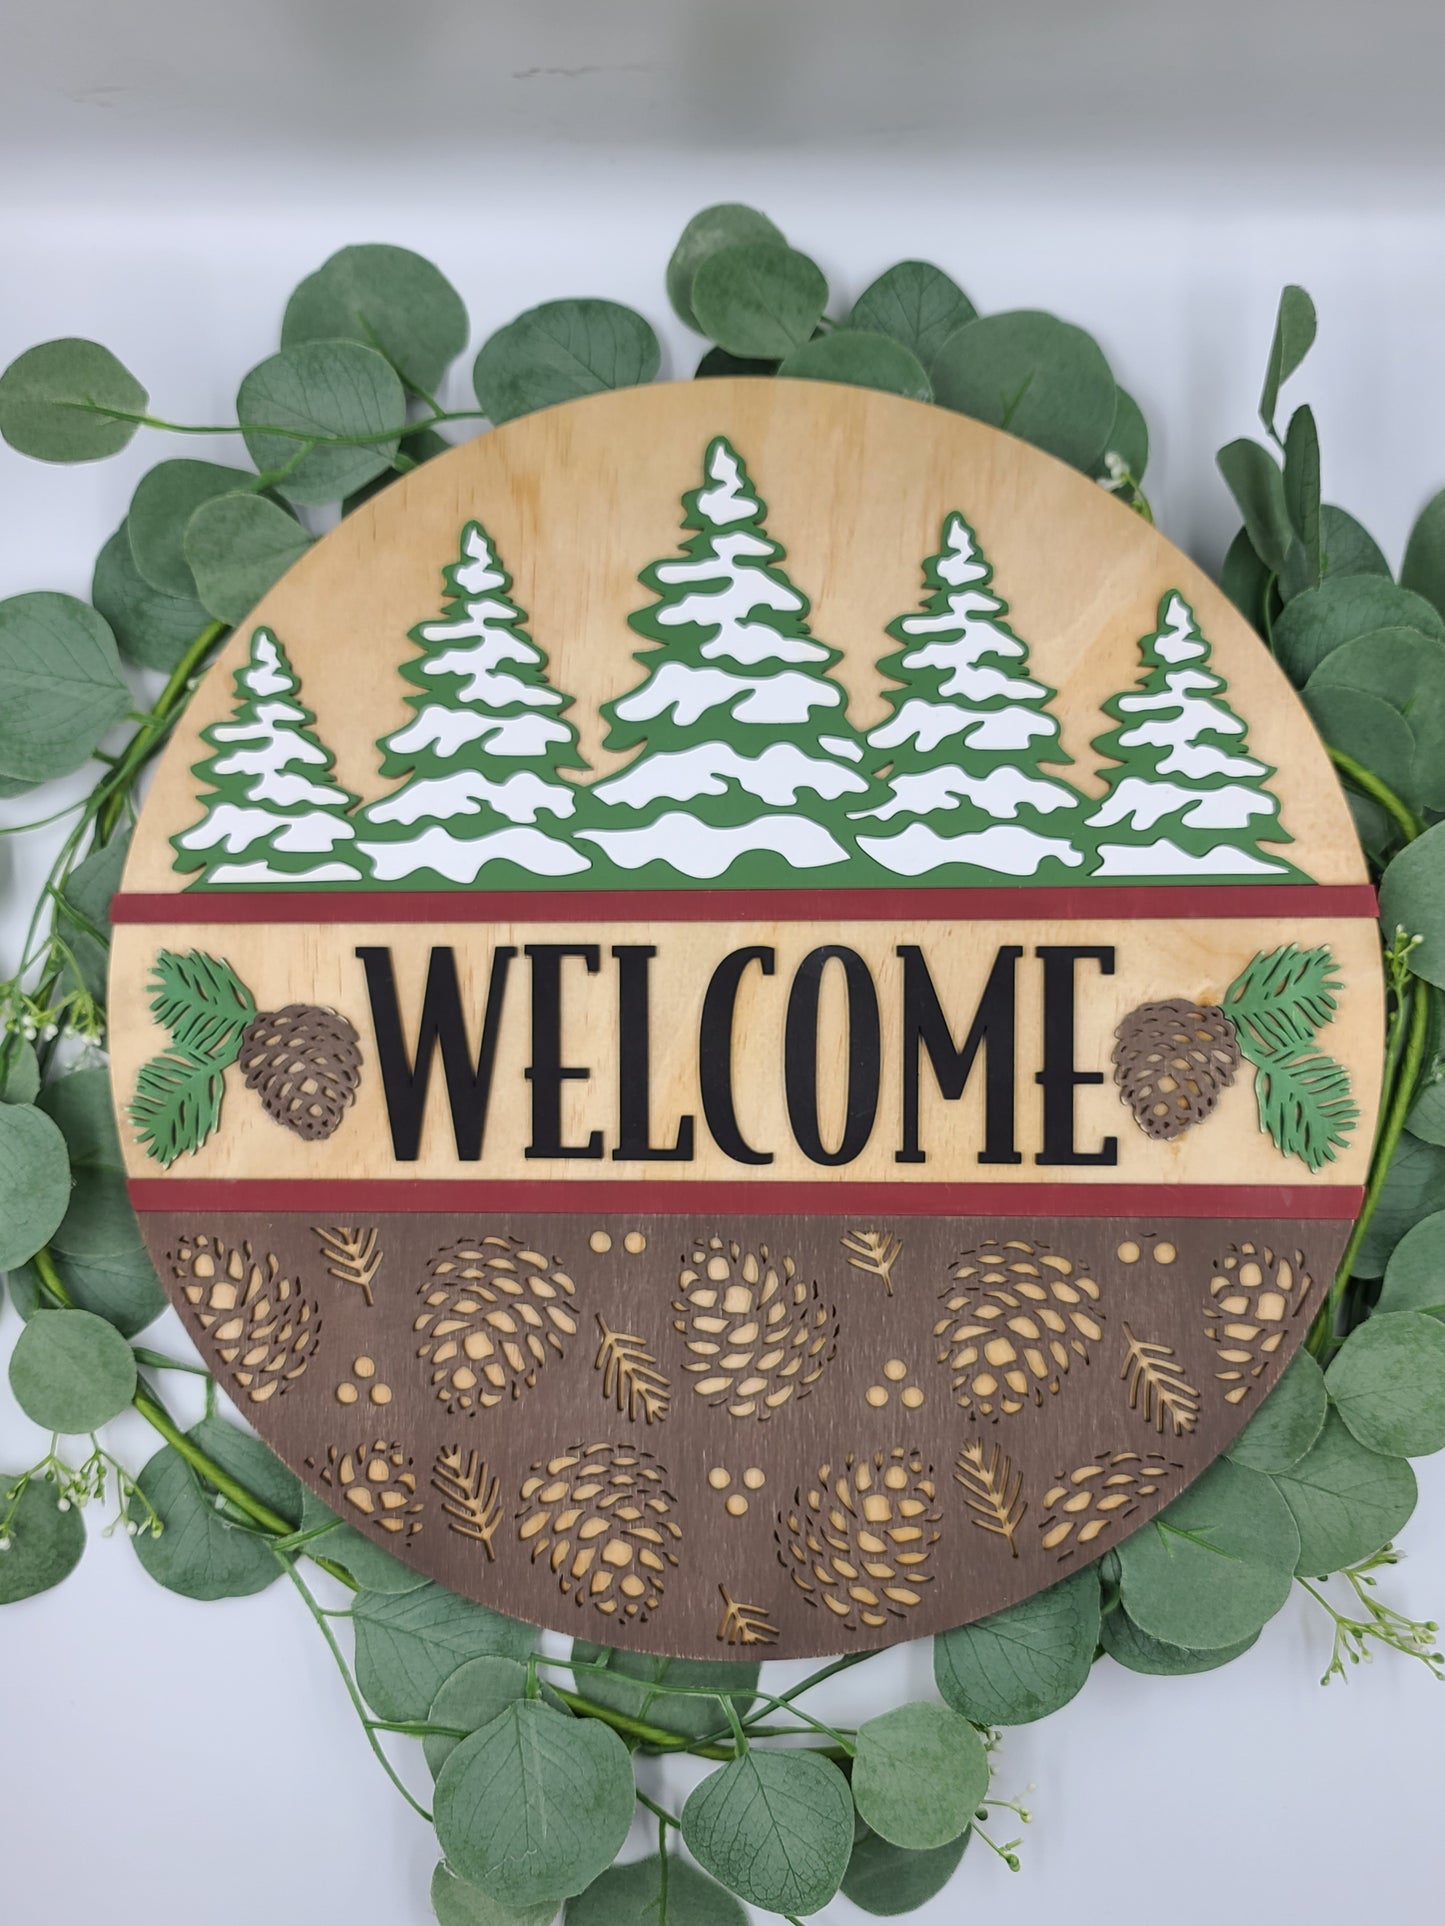 Welcome Pinecone Round